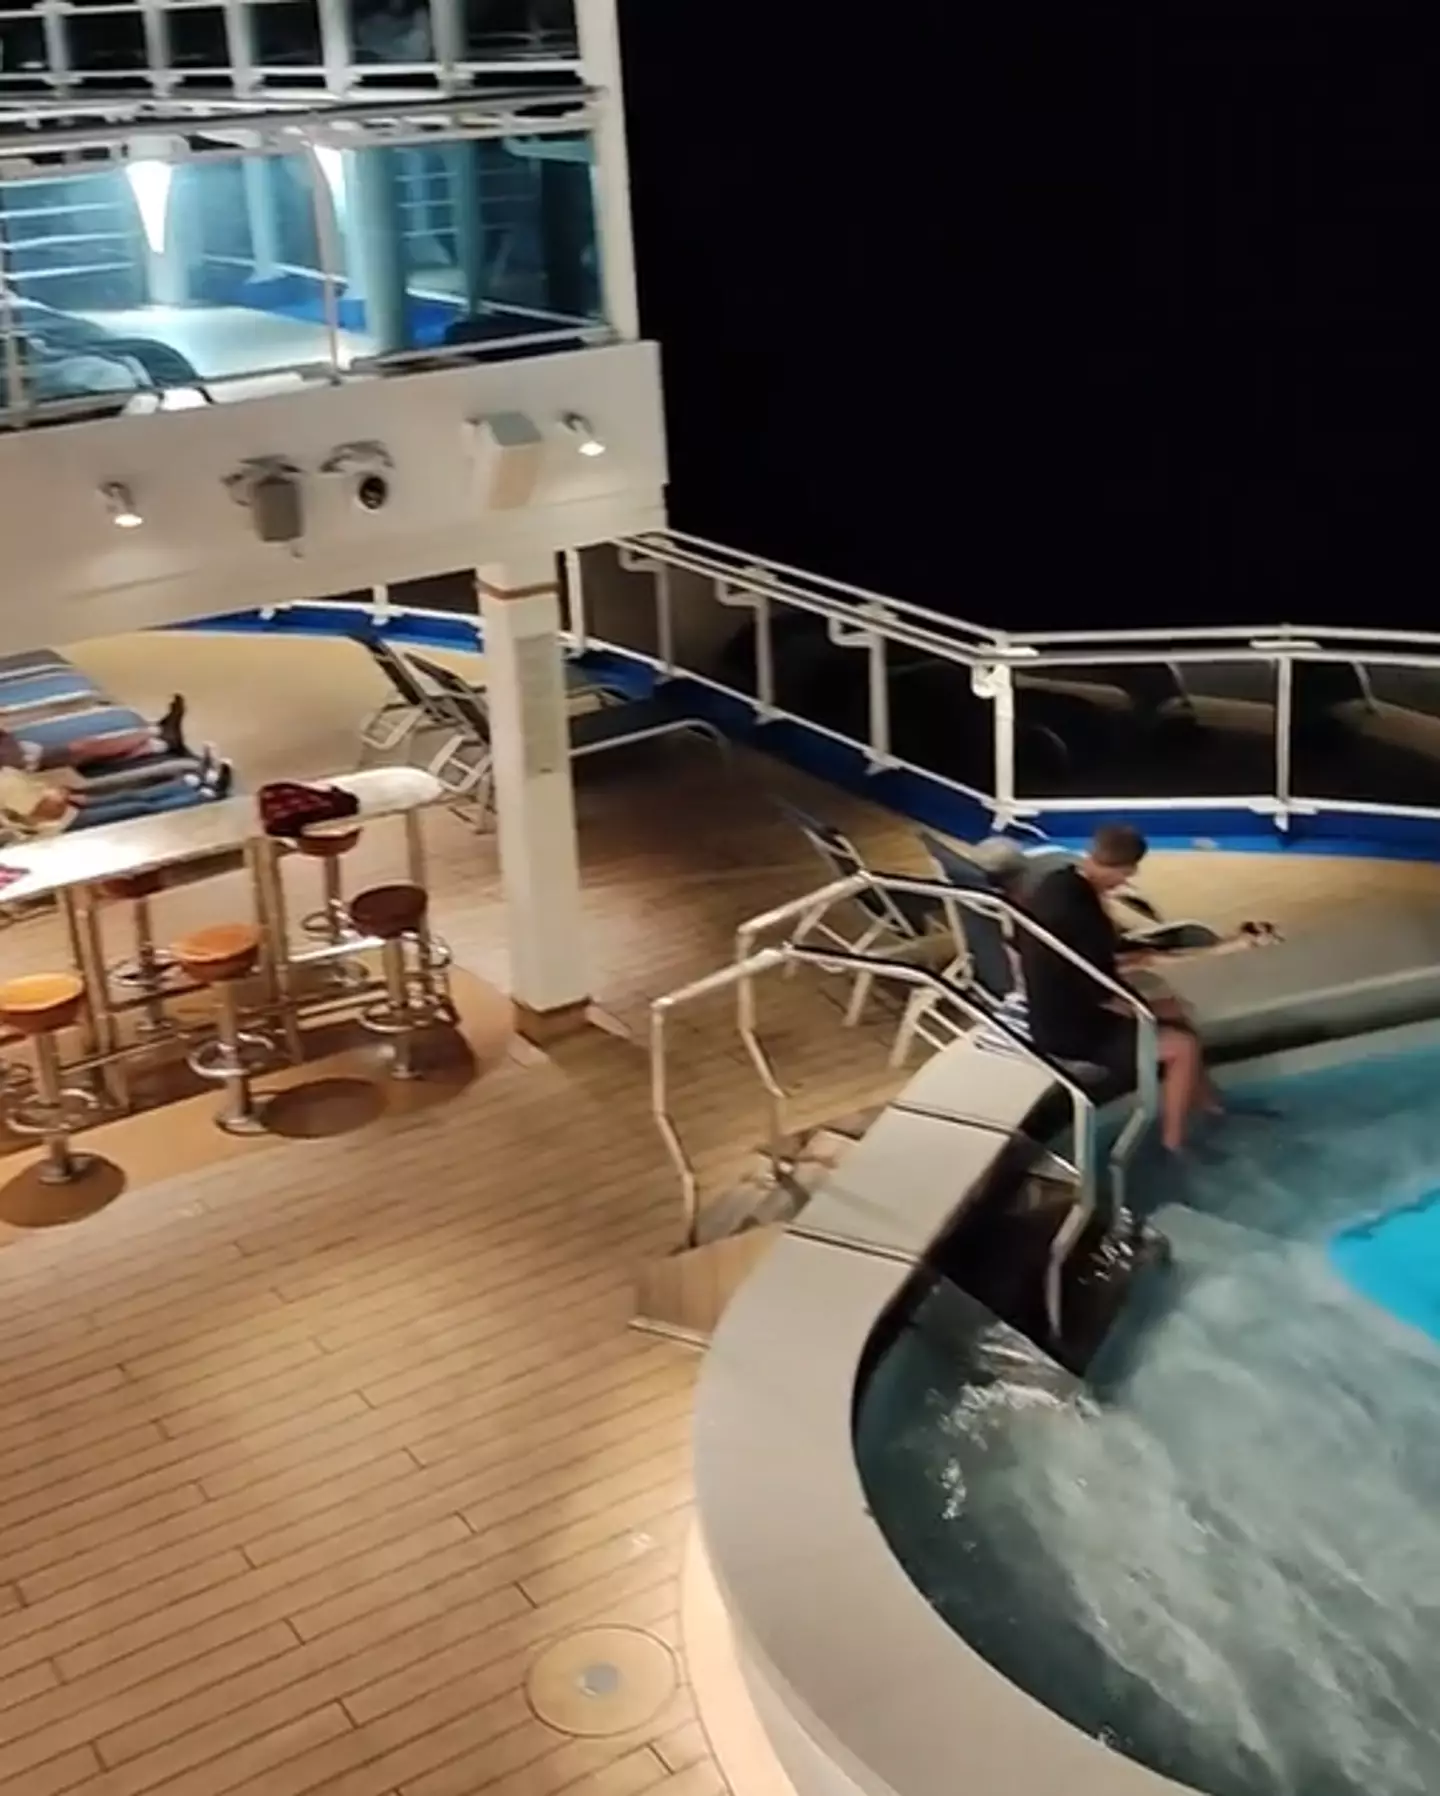 User @chasingthedream.hj showed viewers exactly what to expect on a cruise and they were freaked.